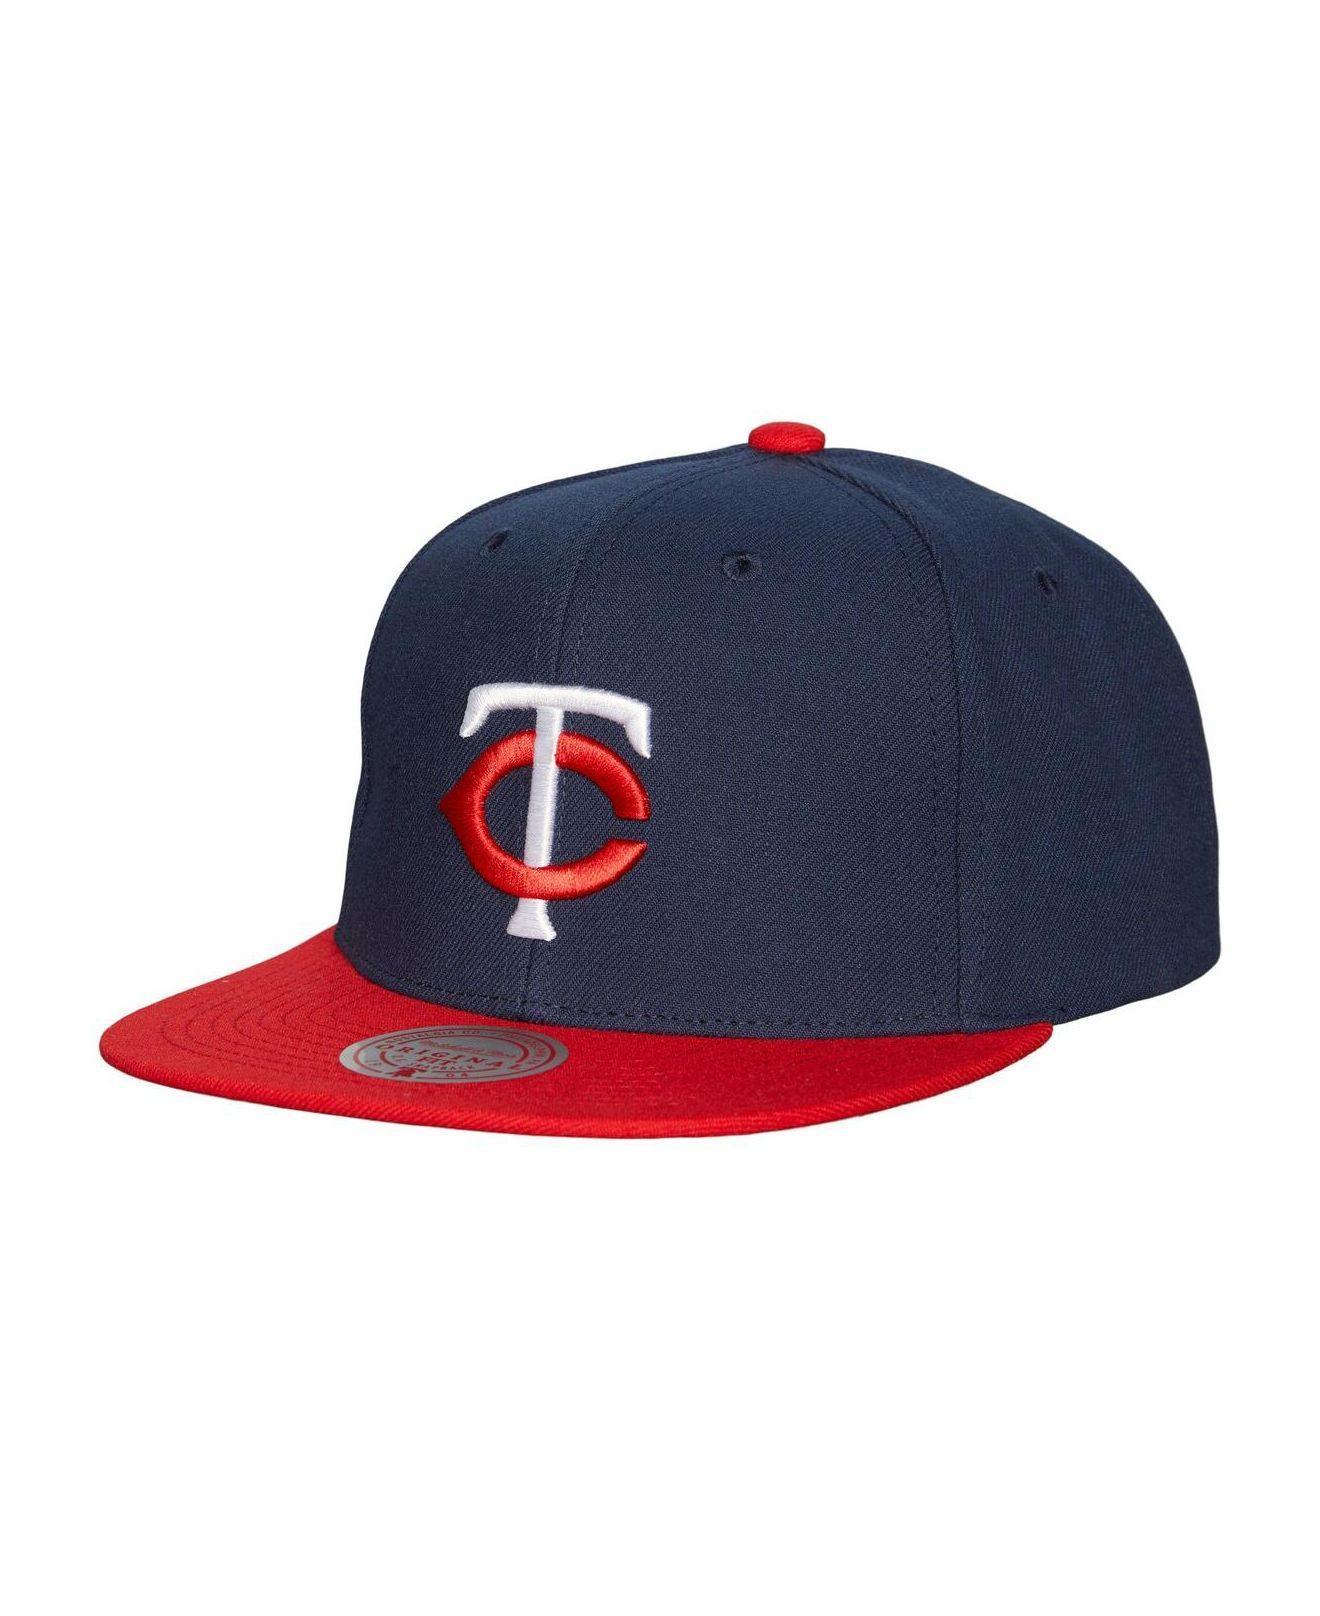 Mitchell & Ness Navy Minnesota Twins Cooperstown Collection